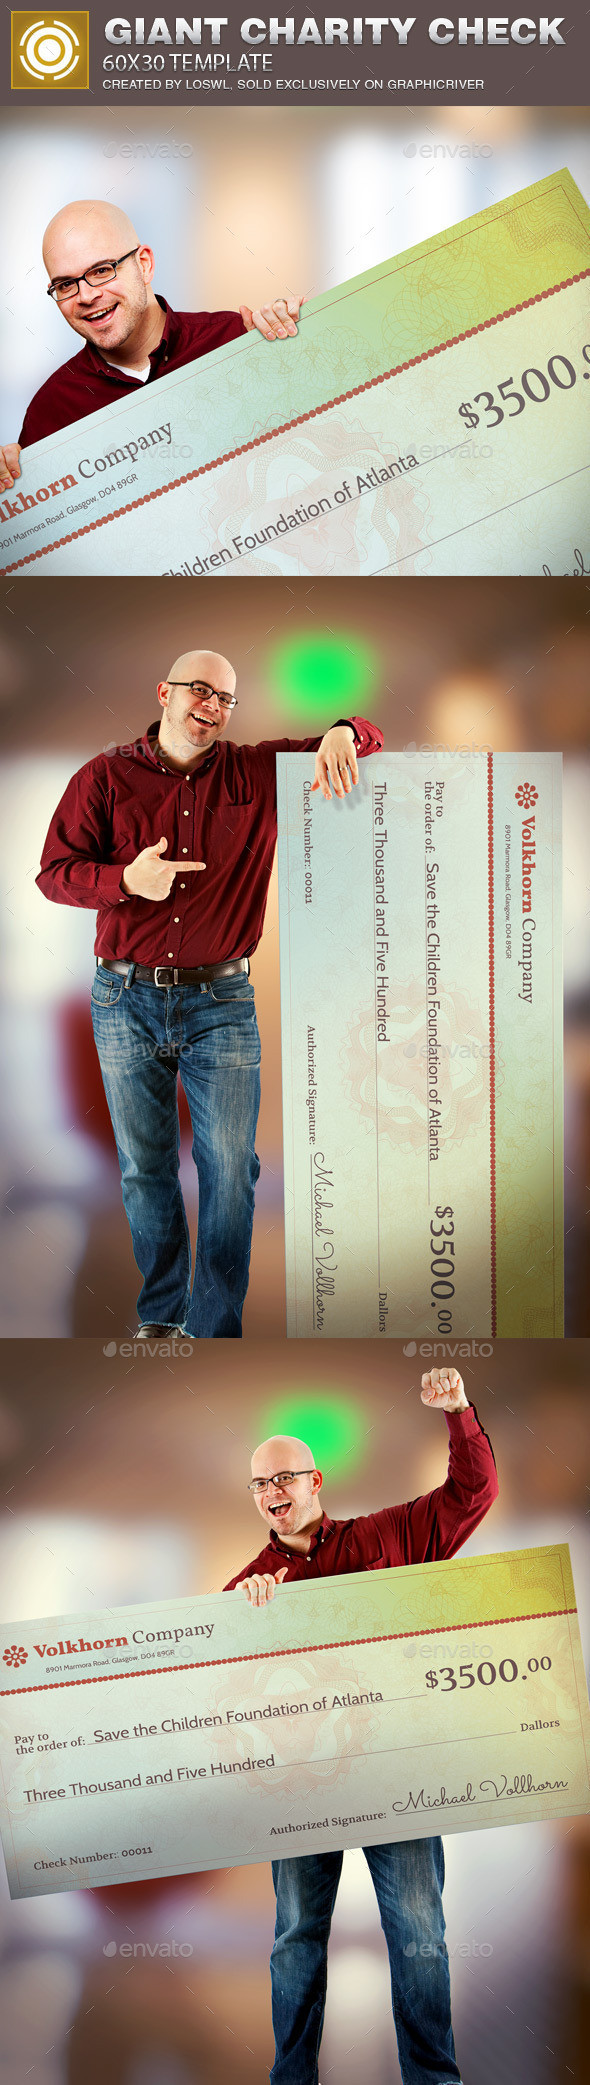 Giant charity check template image preview